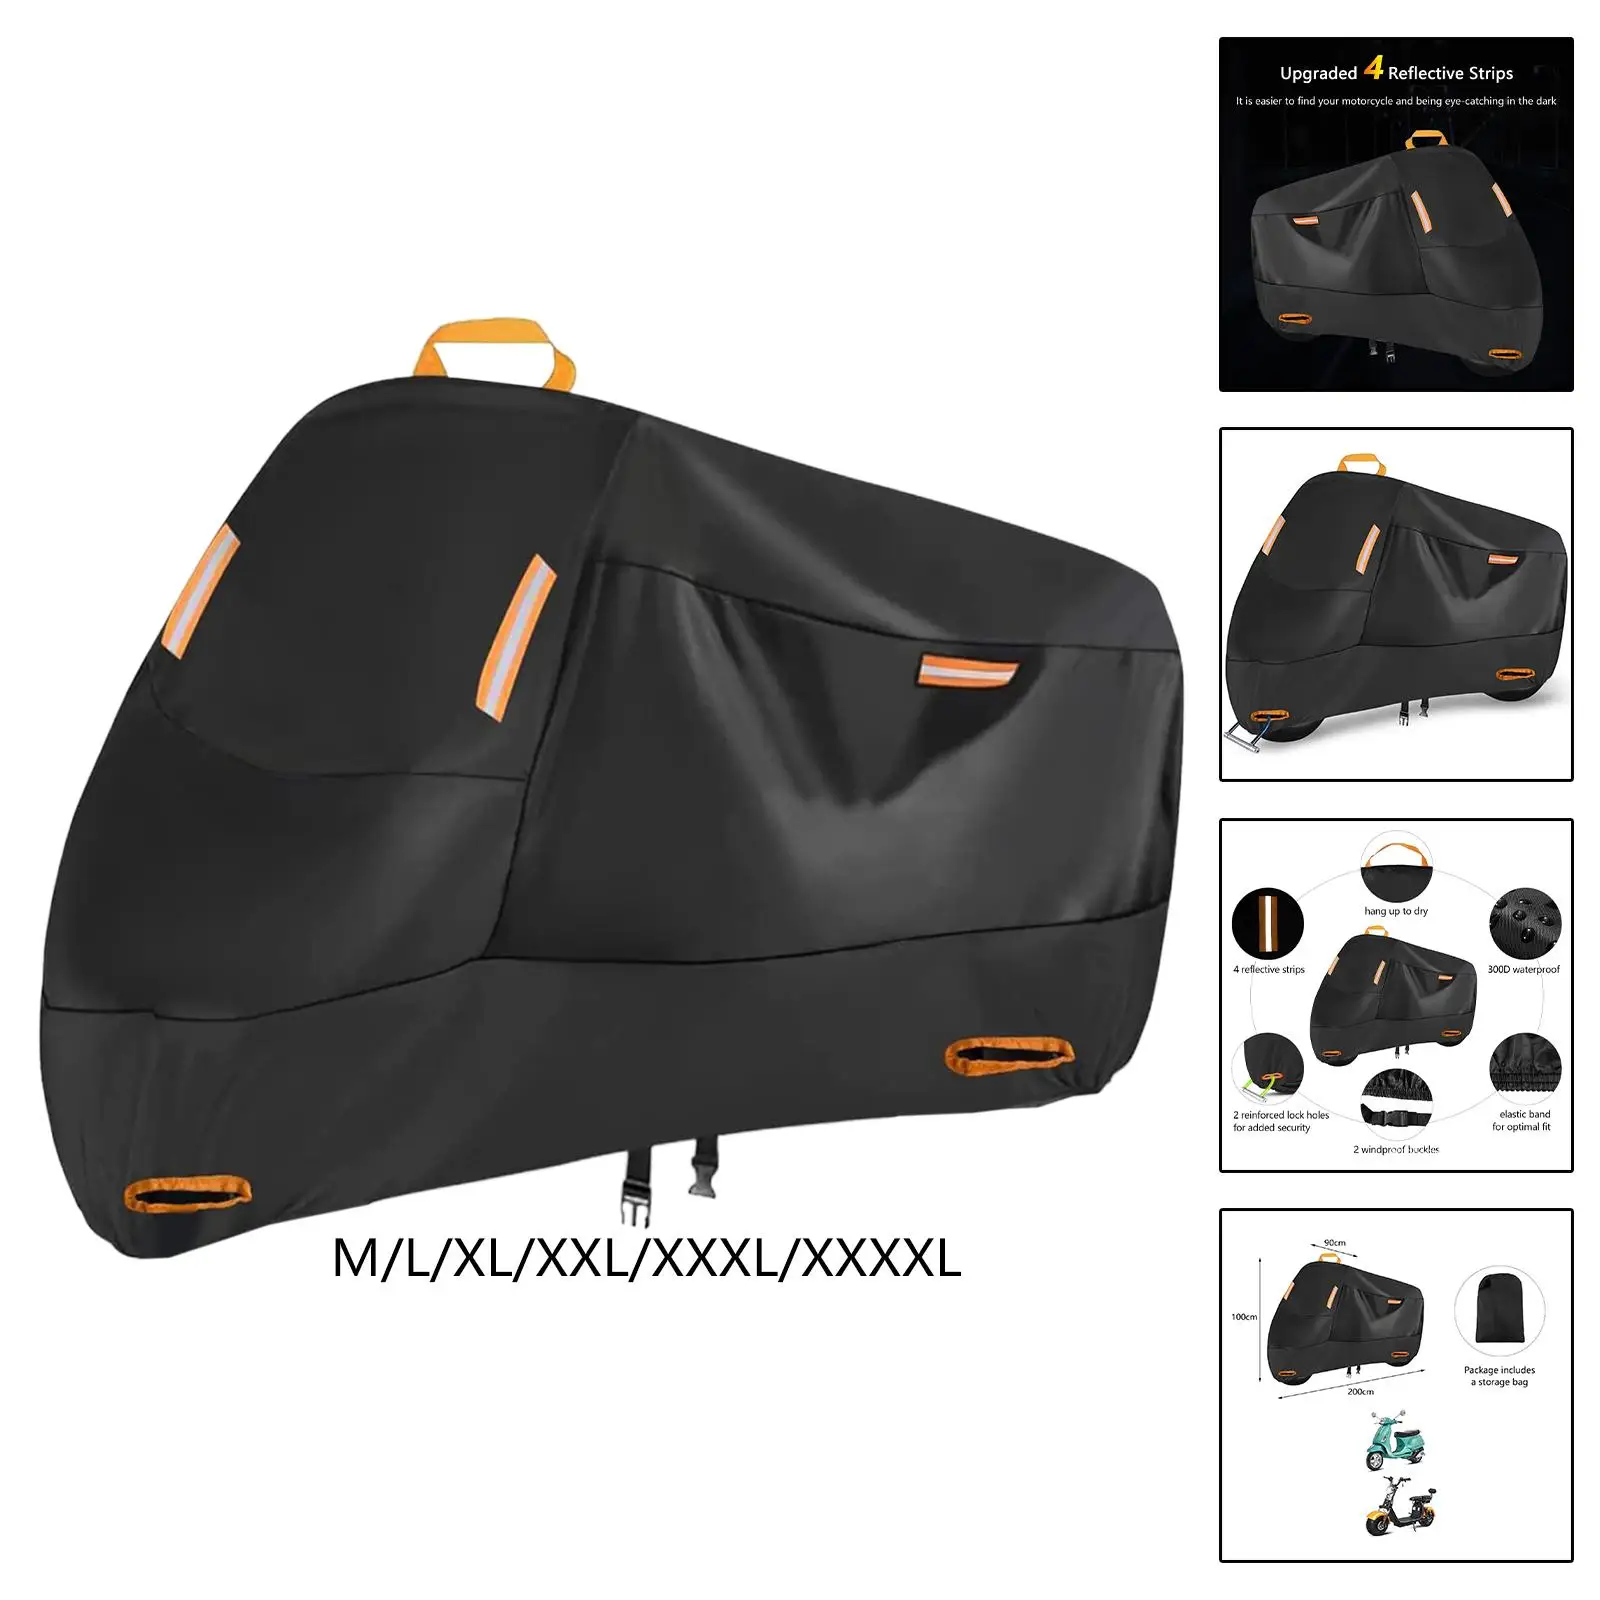 Motorcycle Cover with 4 Reflective Strips Motorbike Cover for Motorbike